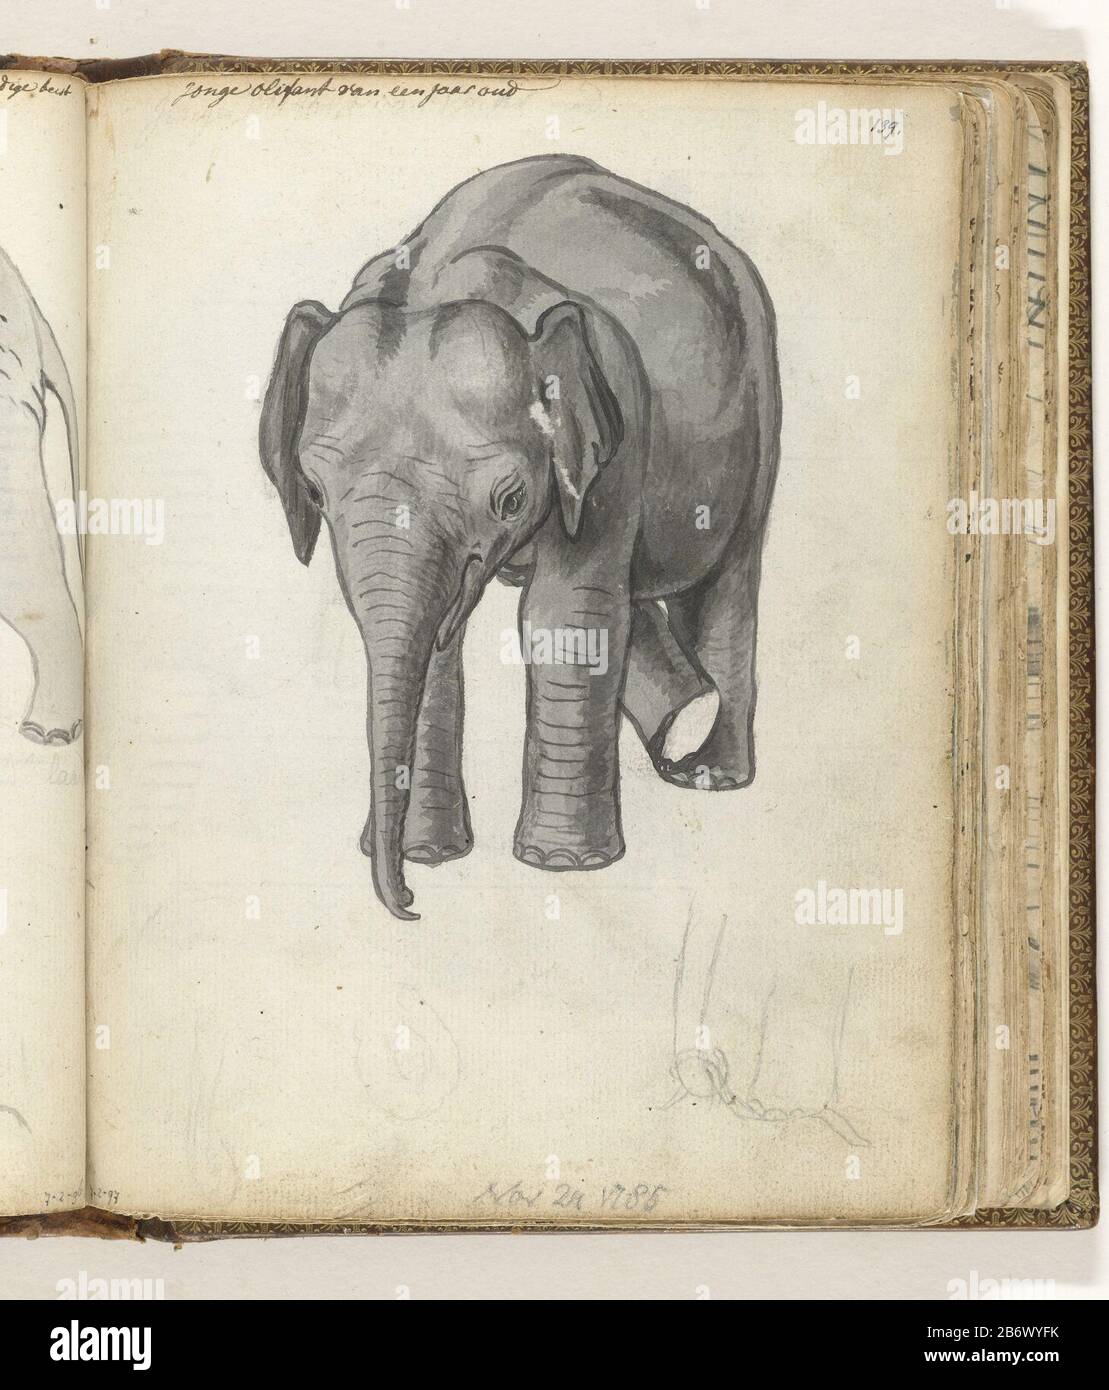 Jonge olifant Black and white drawing of an elephant one year old and a pencil sketch of his leg and trunk. With inscription. Part of the sketchbook of Jan Brandes, Vol. 2 (1808), p. 139. Manufacturer : artist: Jan BrandesPlaats manufacture: Yes-Ela Dating: Nov 24 1785 Physical features: brush in gray on sketch in pencil material: Paper Pencil Technique: Brush dimensions: H 195 mm × W 155 mm Subject: trunked animals: elephantWie: East India Company Stock Photo